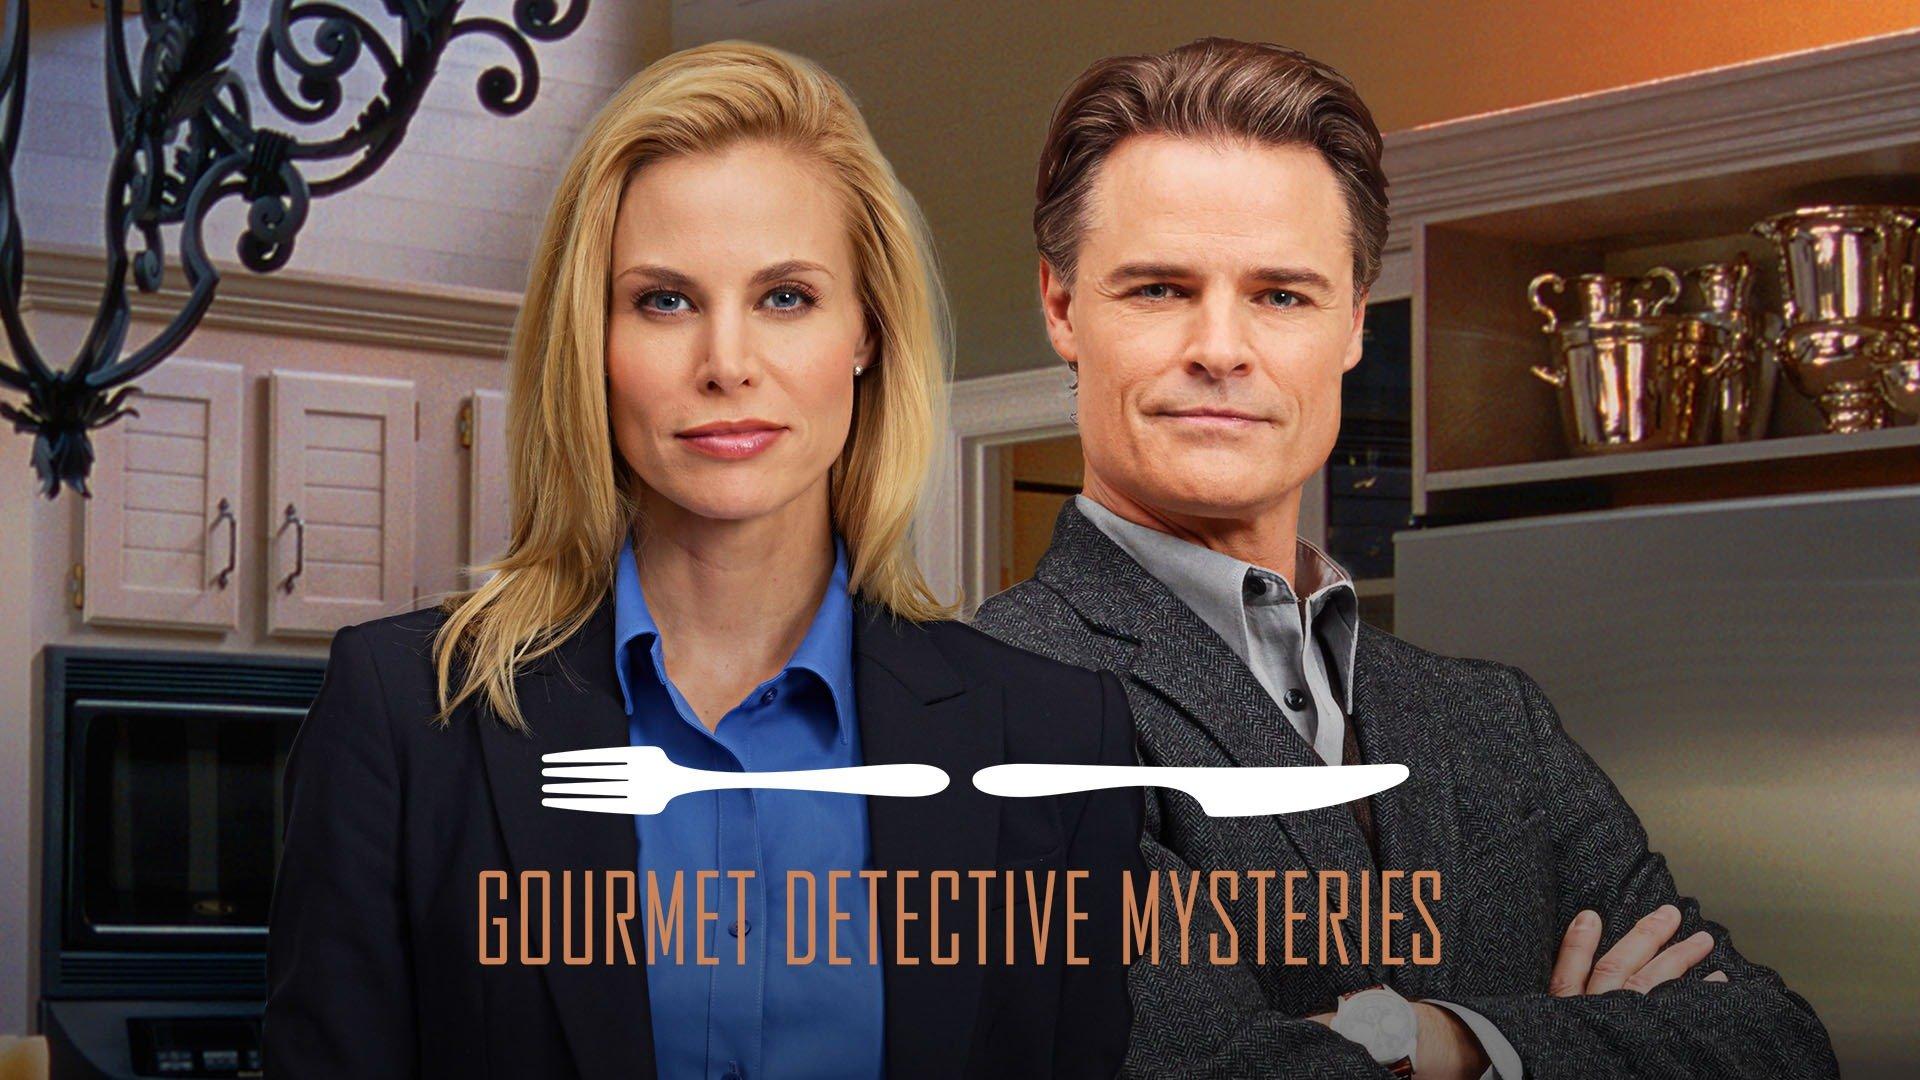 Watch Gourmet Detective Mysteries Streaming Online on Philo (Free Trial)